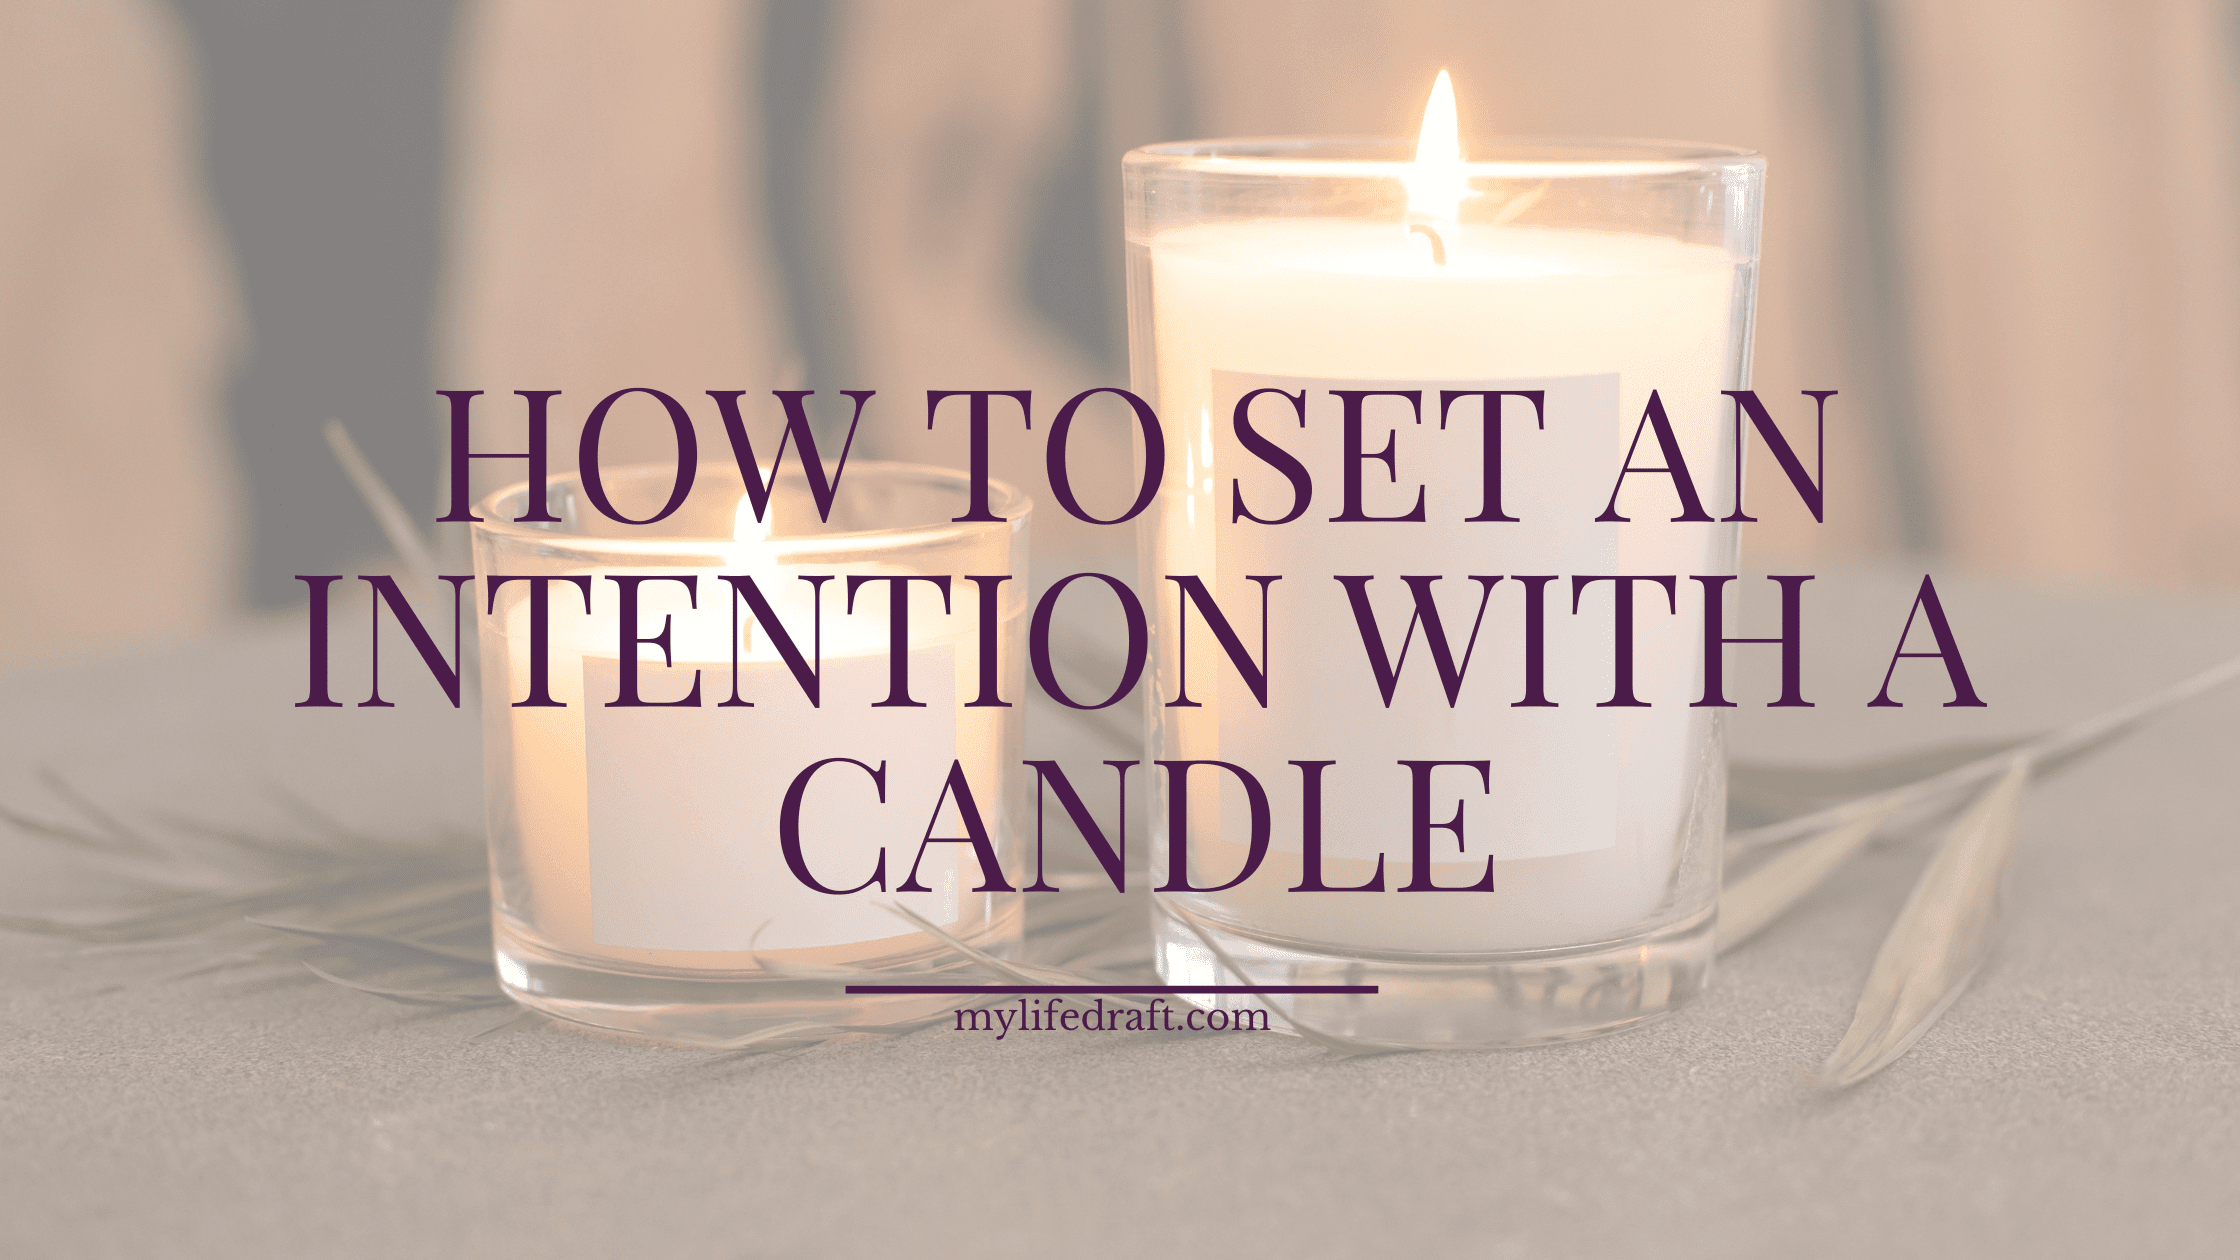 How To Set An Intention With A Candle Today